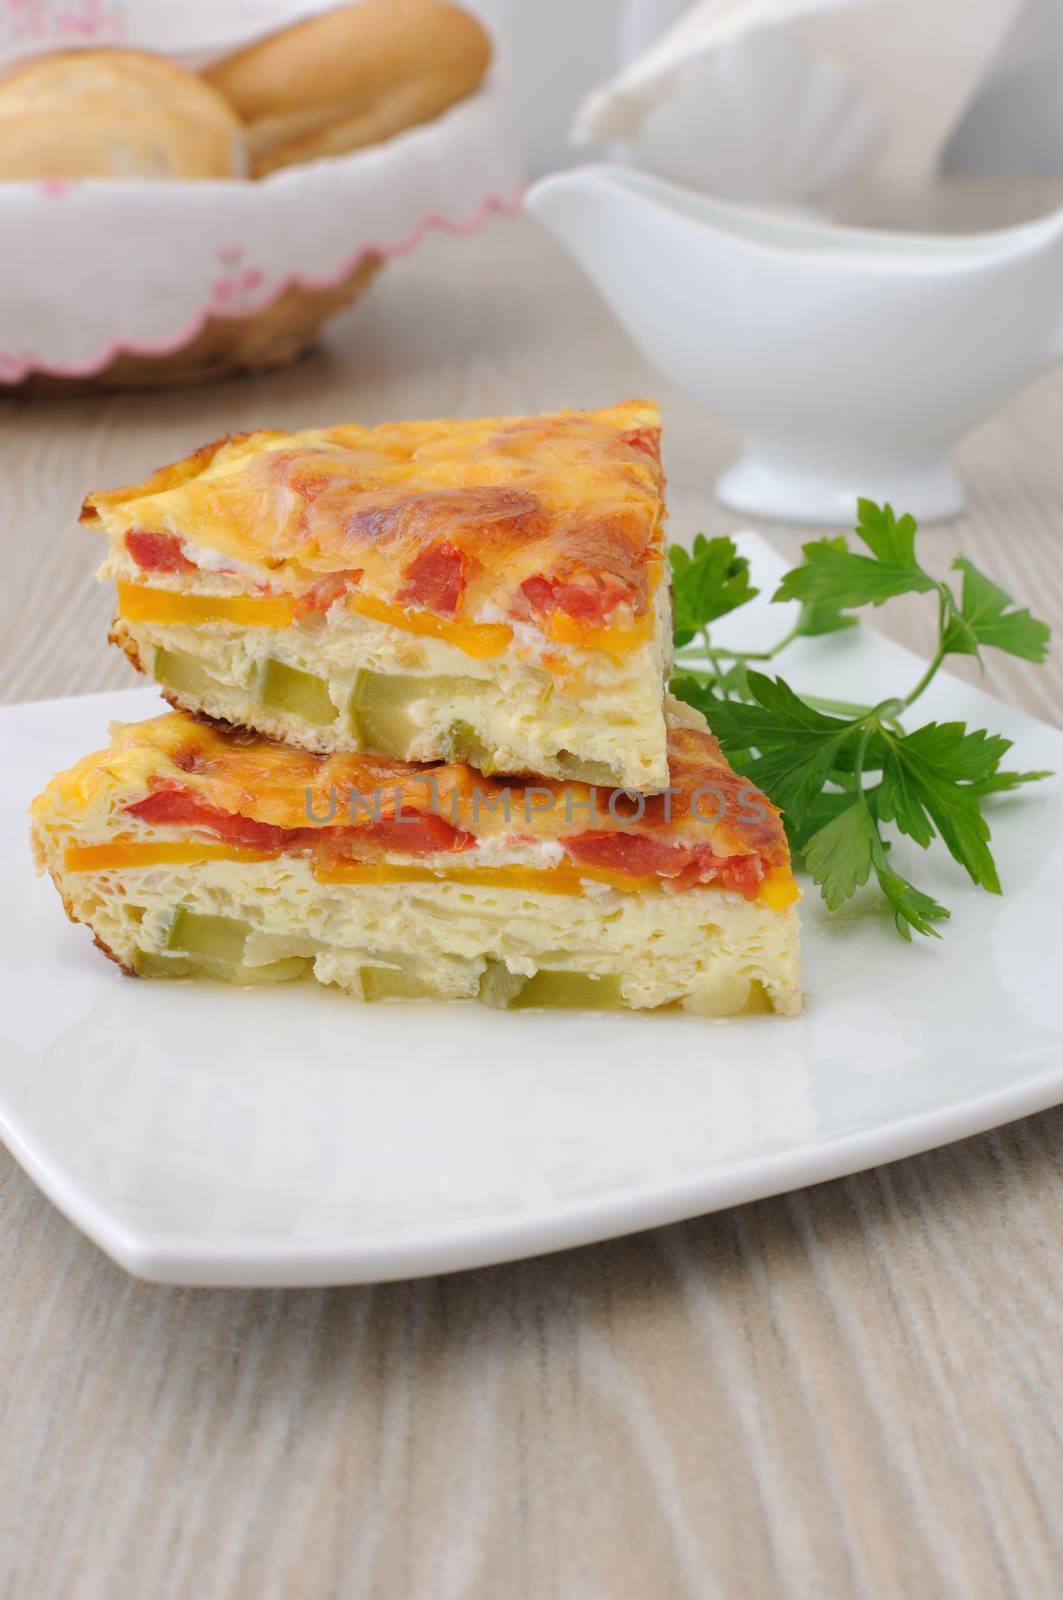 Omelet with vegetables and cheese crust by Apolonia